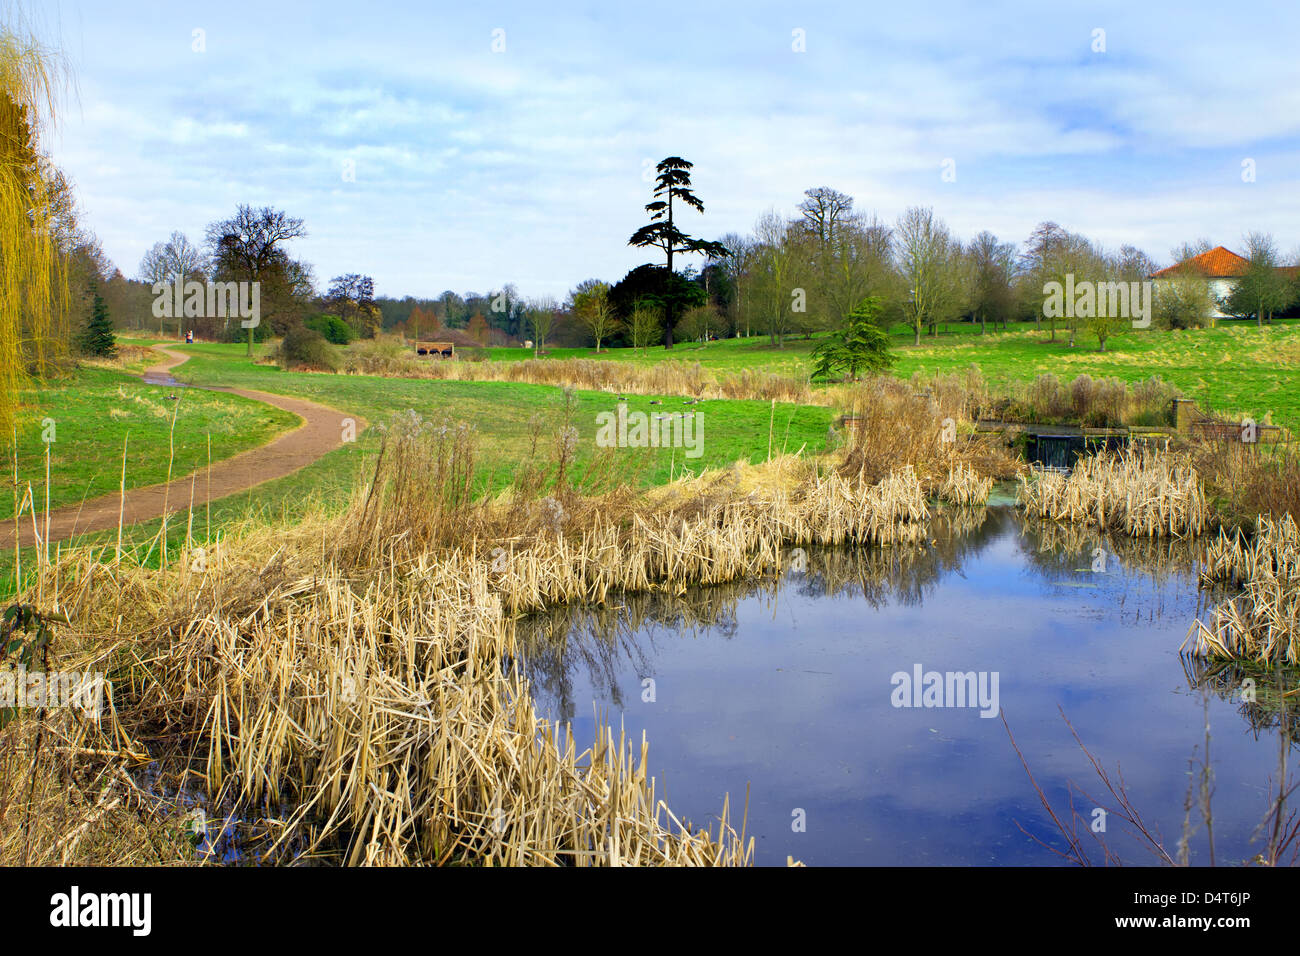 english countryside scene on a cold winter day Stock Photo